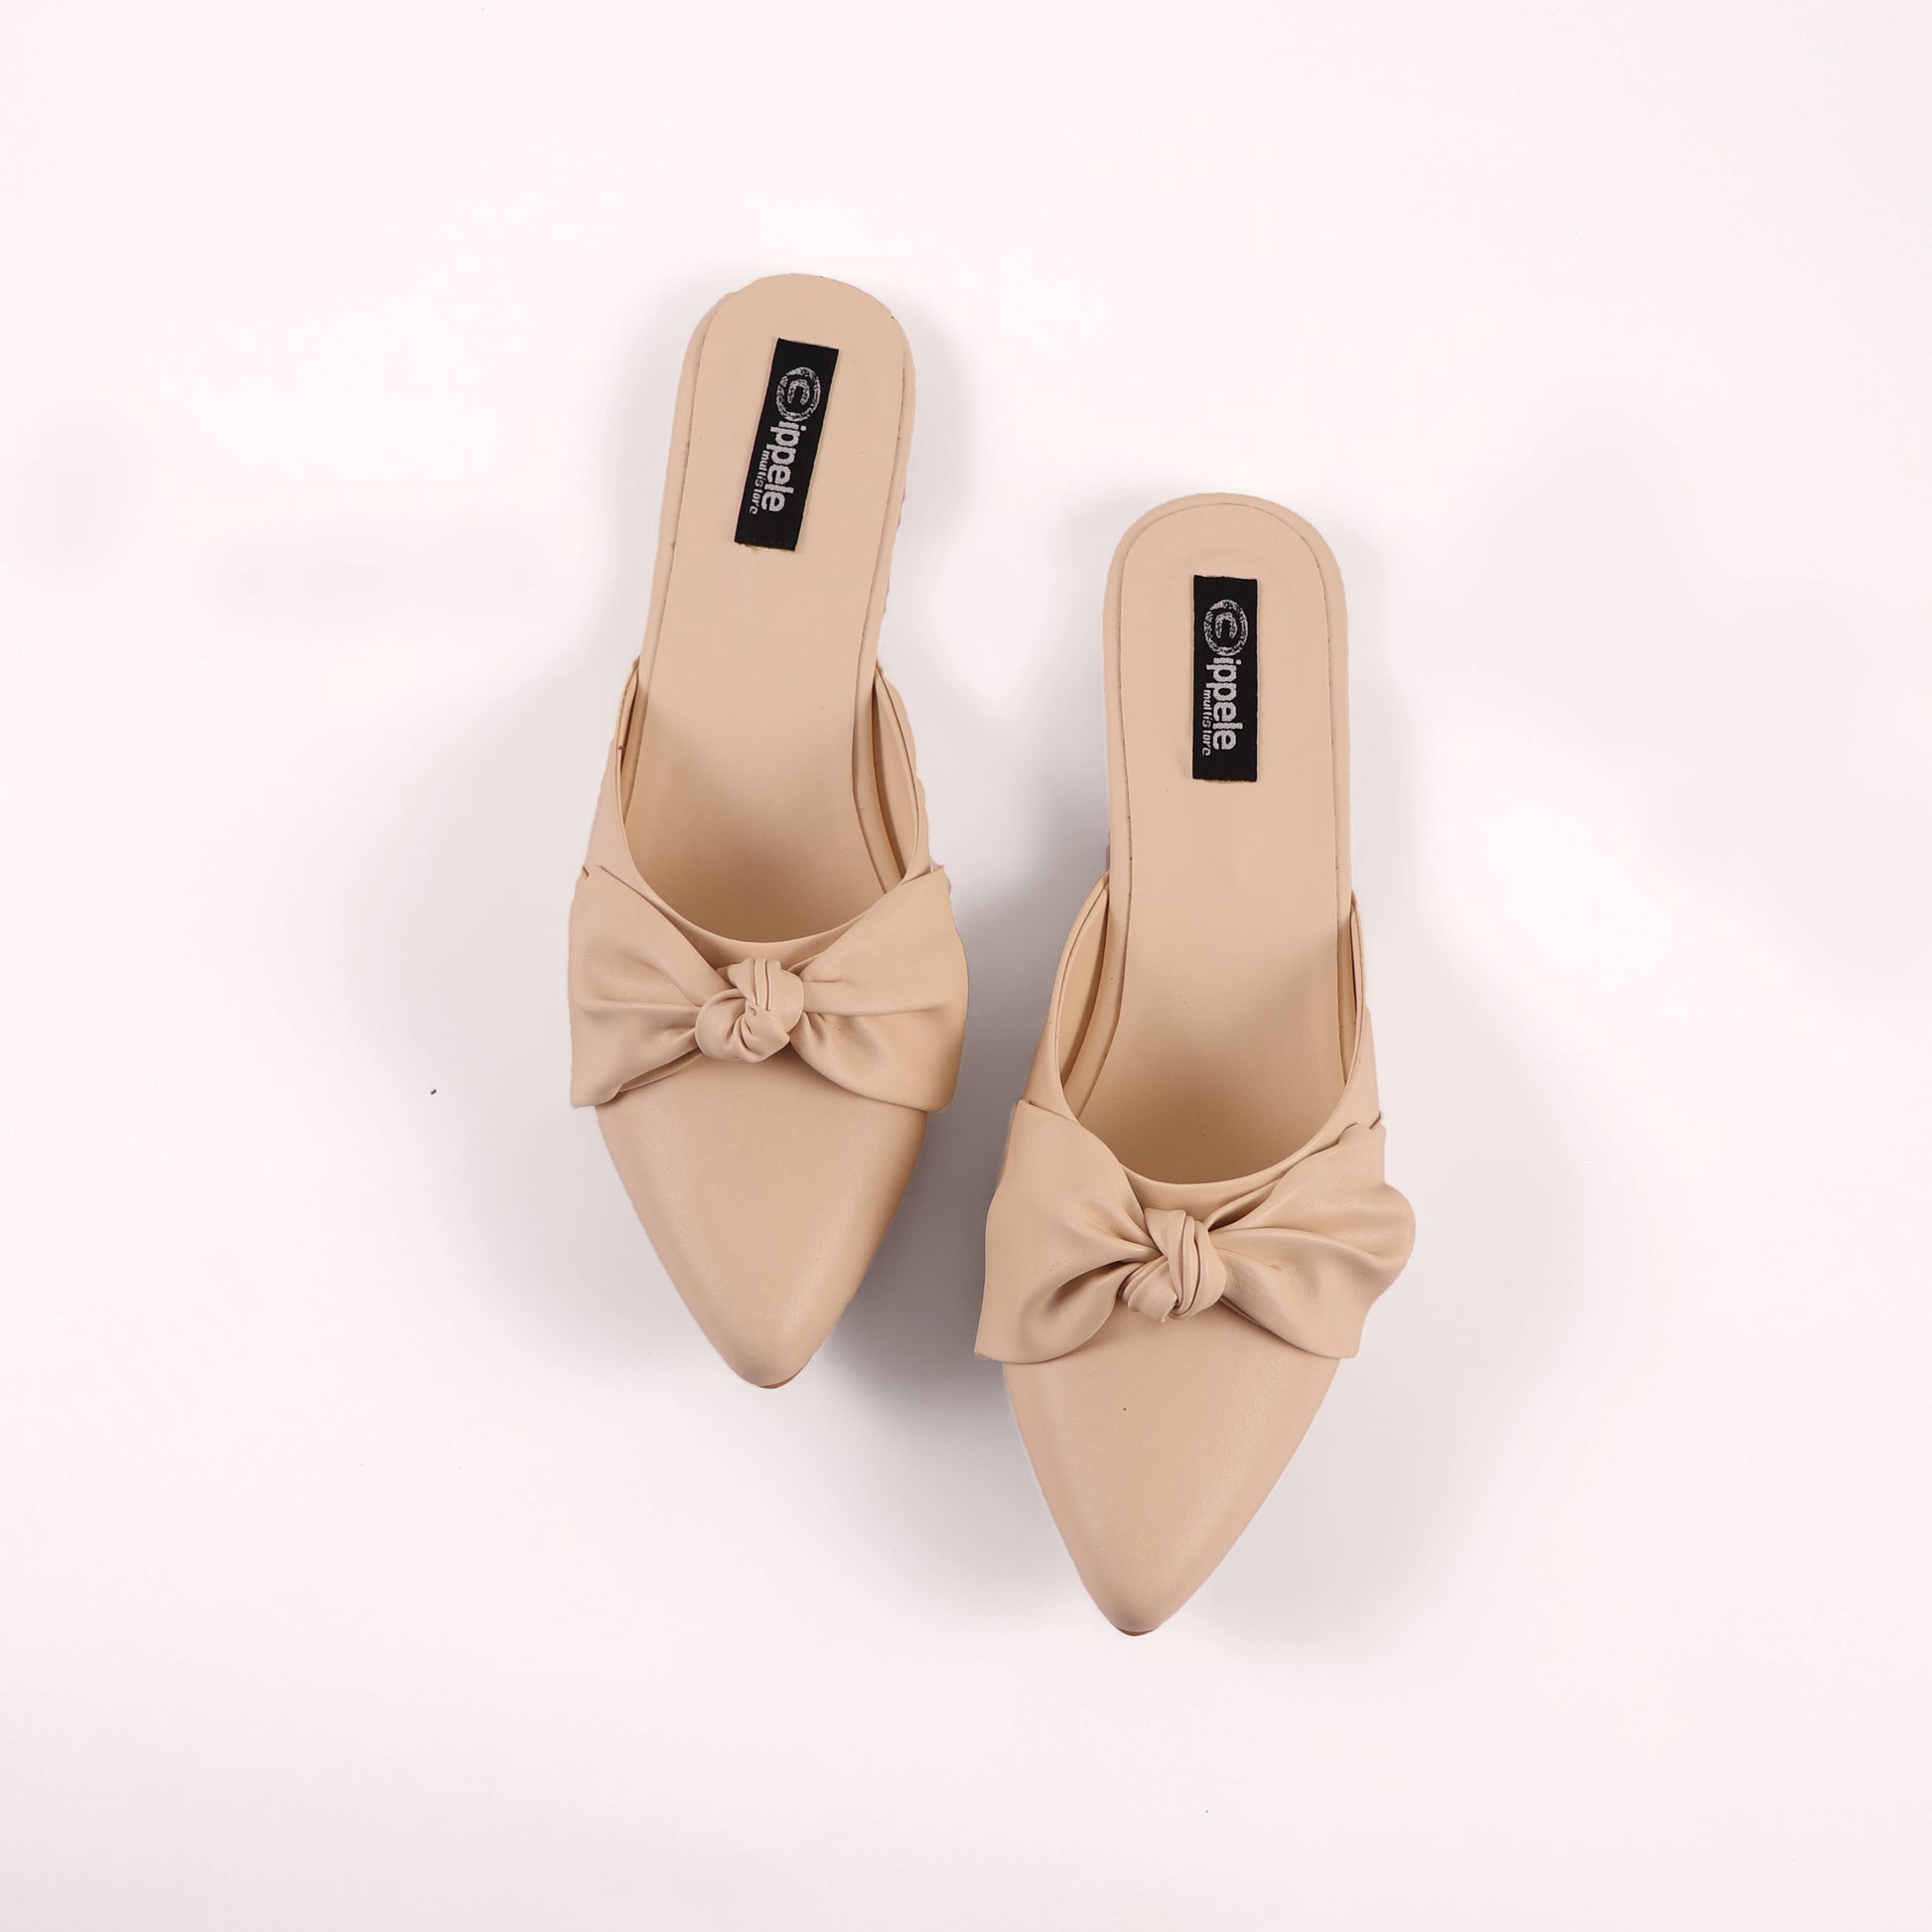 Foot Wear,The Charismatic Bow Mules in Cream - Cippele Multi Store